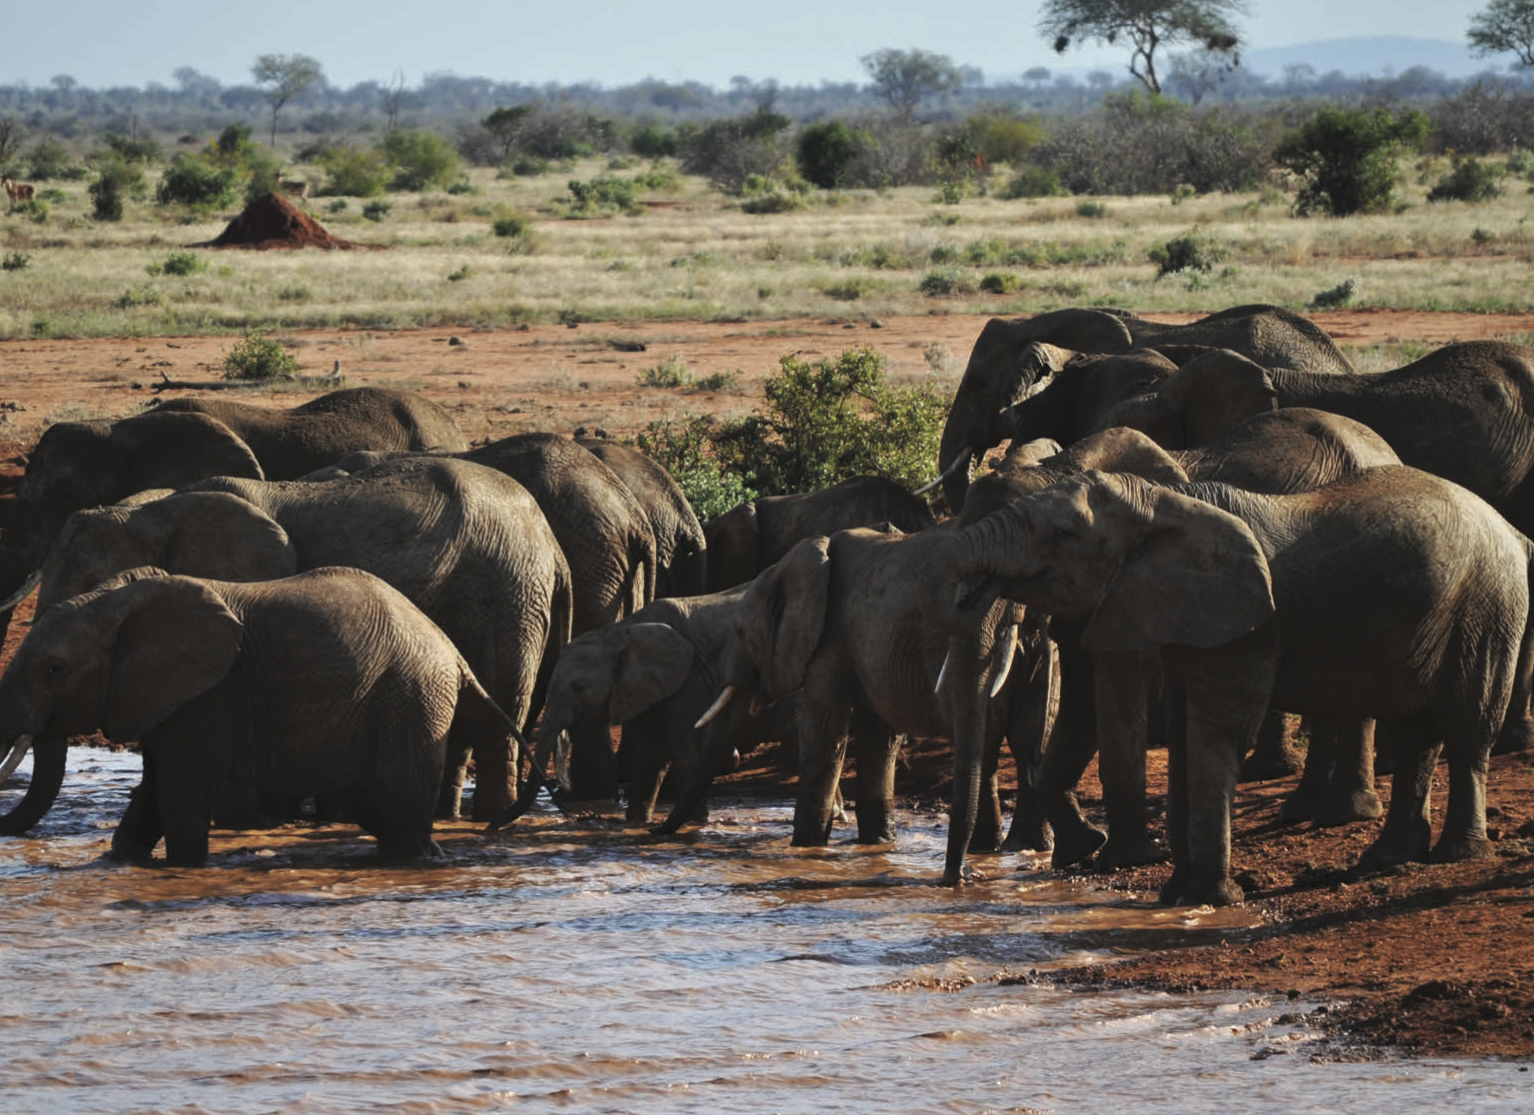 Digital innovation needs to come from researching the wild: Elephants in Tsavo West National Park, Kenya.